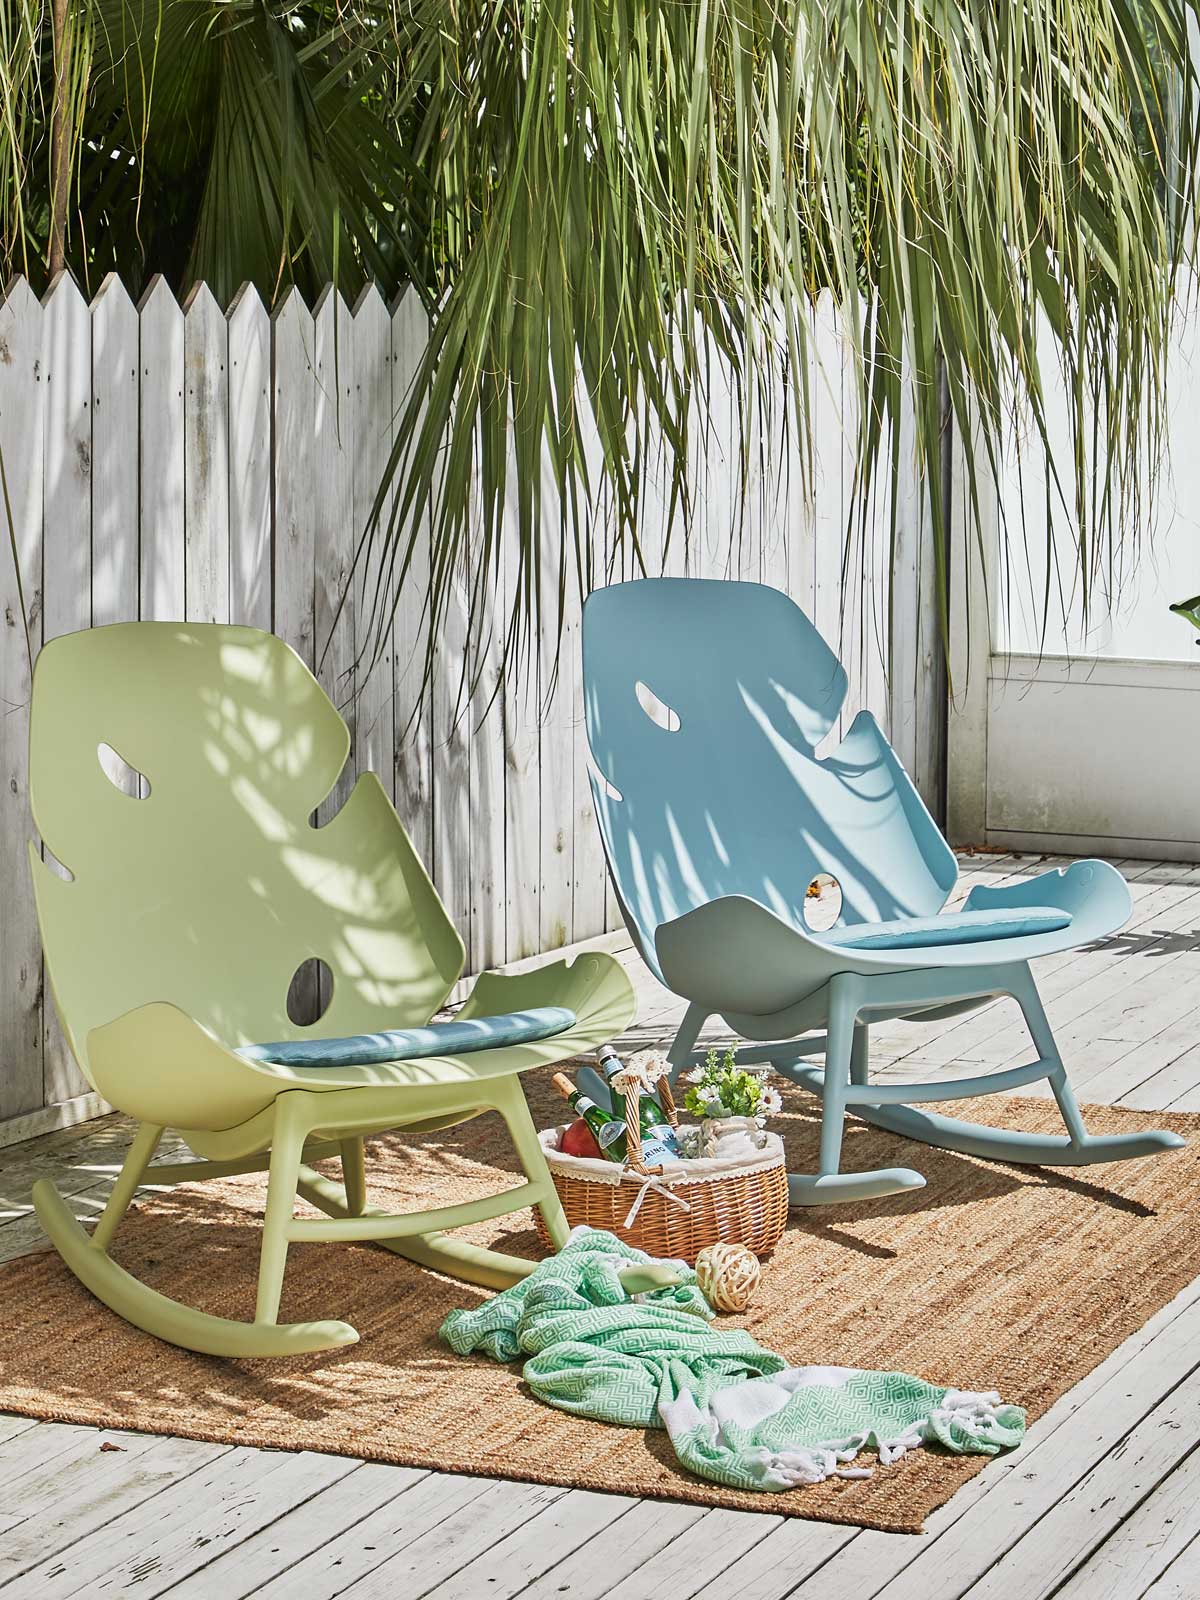 Monstera Rocking Chair(Outdoor)